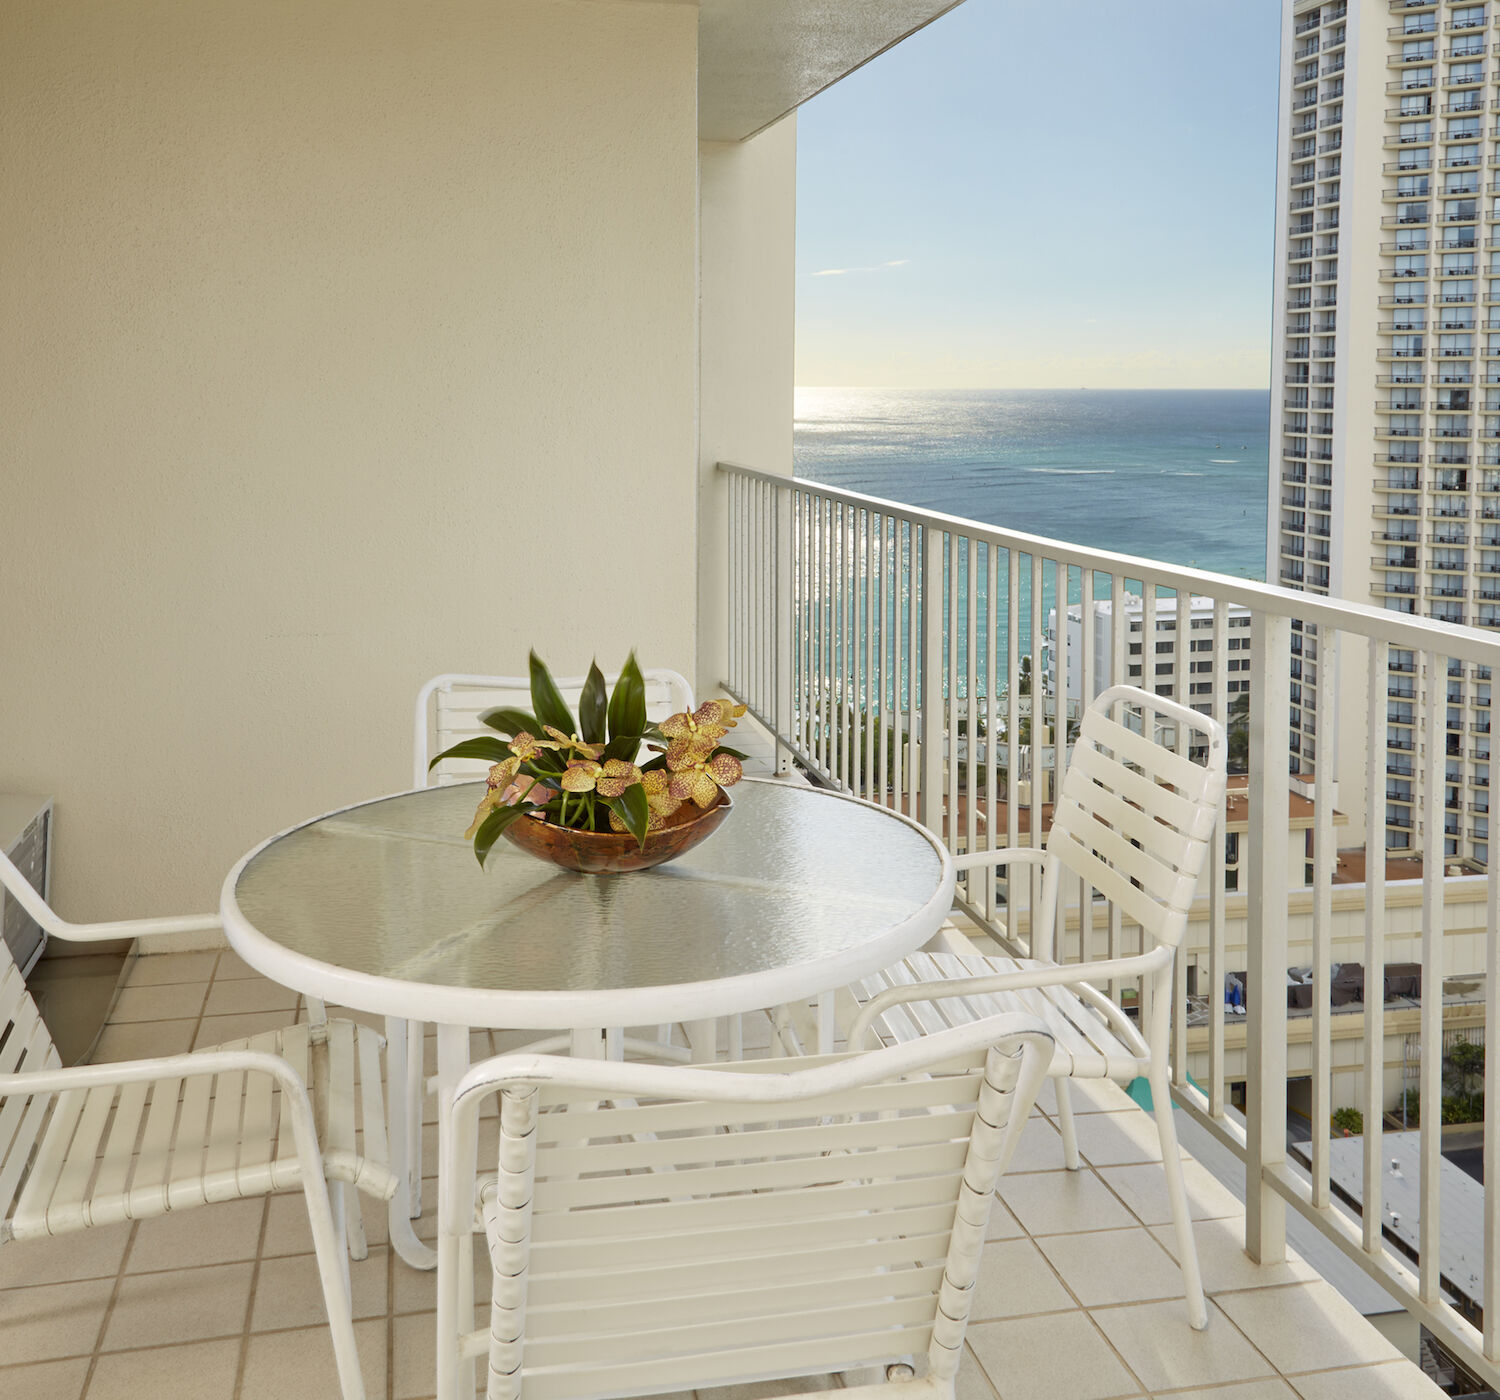 A balcony with a round glass table, four white chairs, and a decorative plant centerpiece overlooks the ocean and tall buildings below.